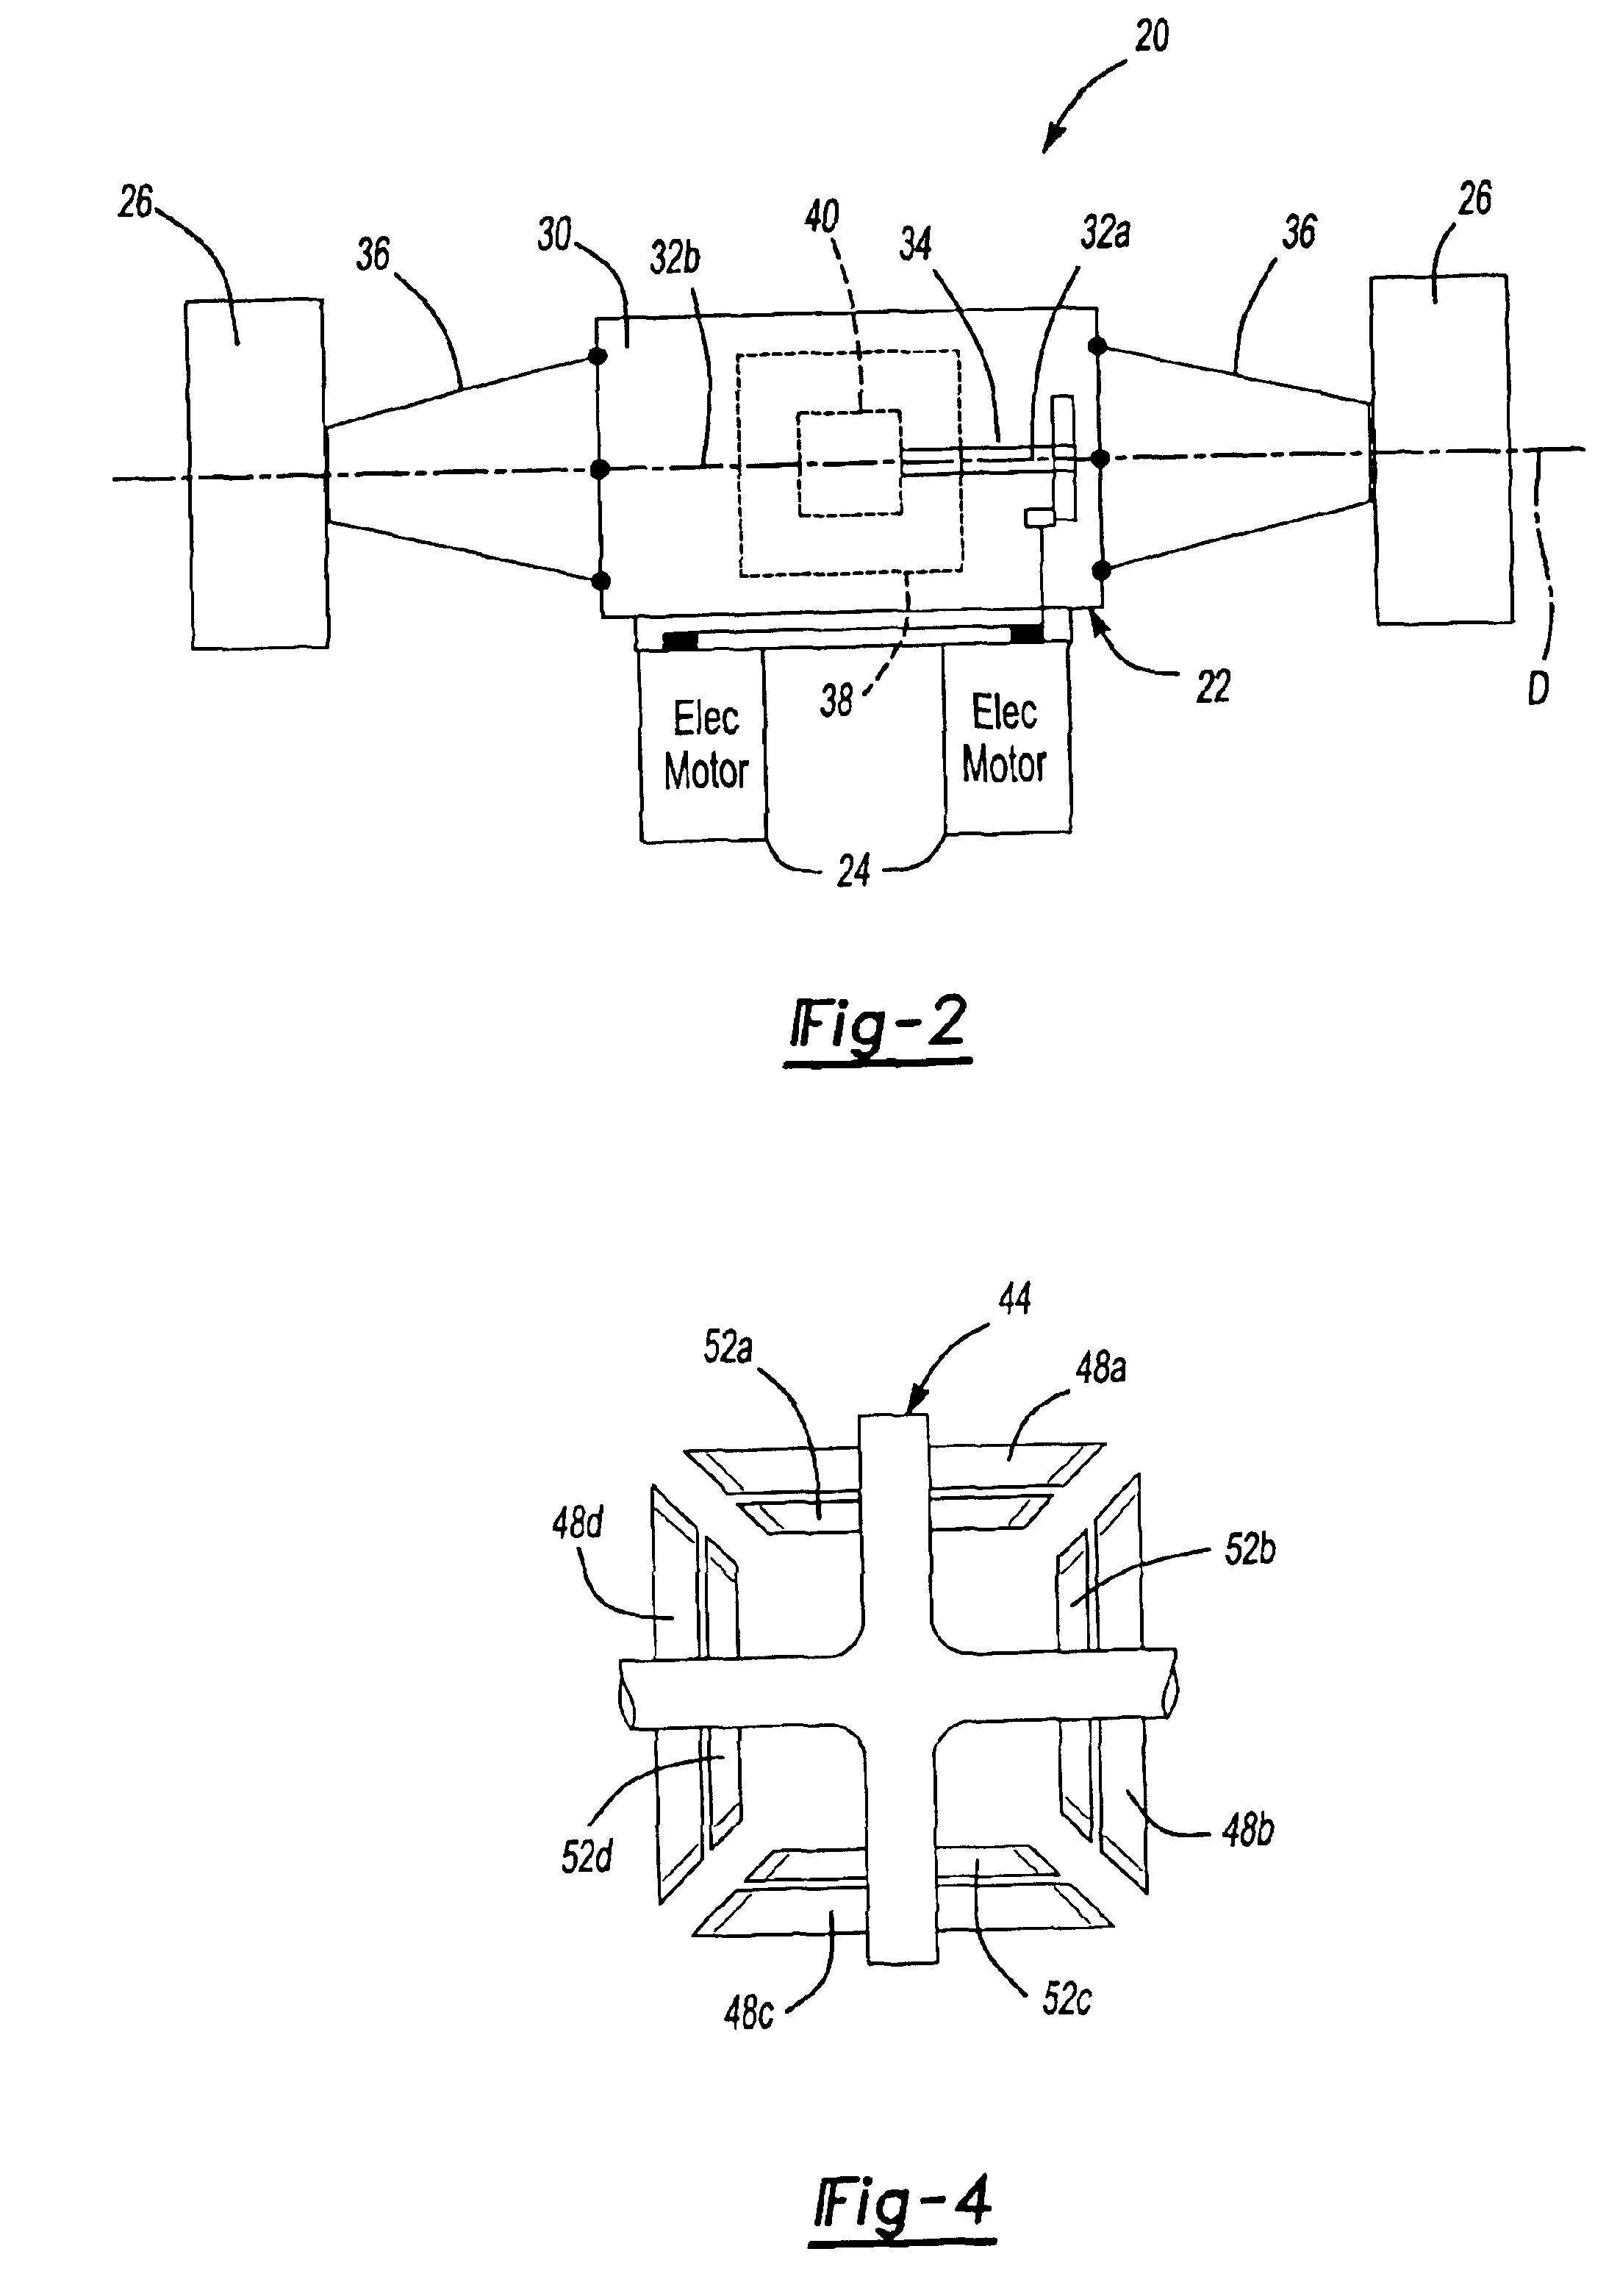 Two-speed gearbox with integrated differential